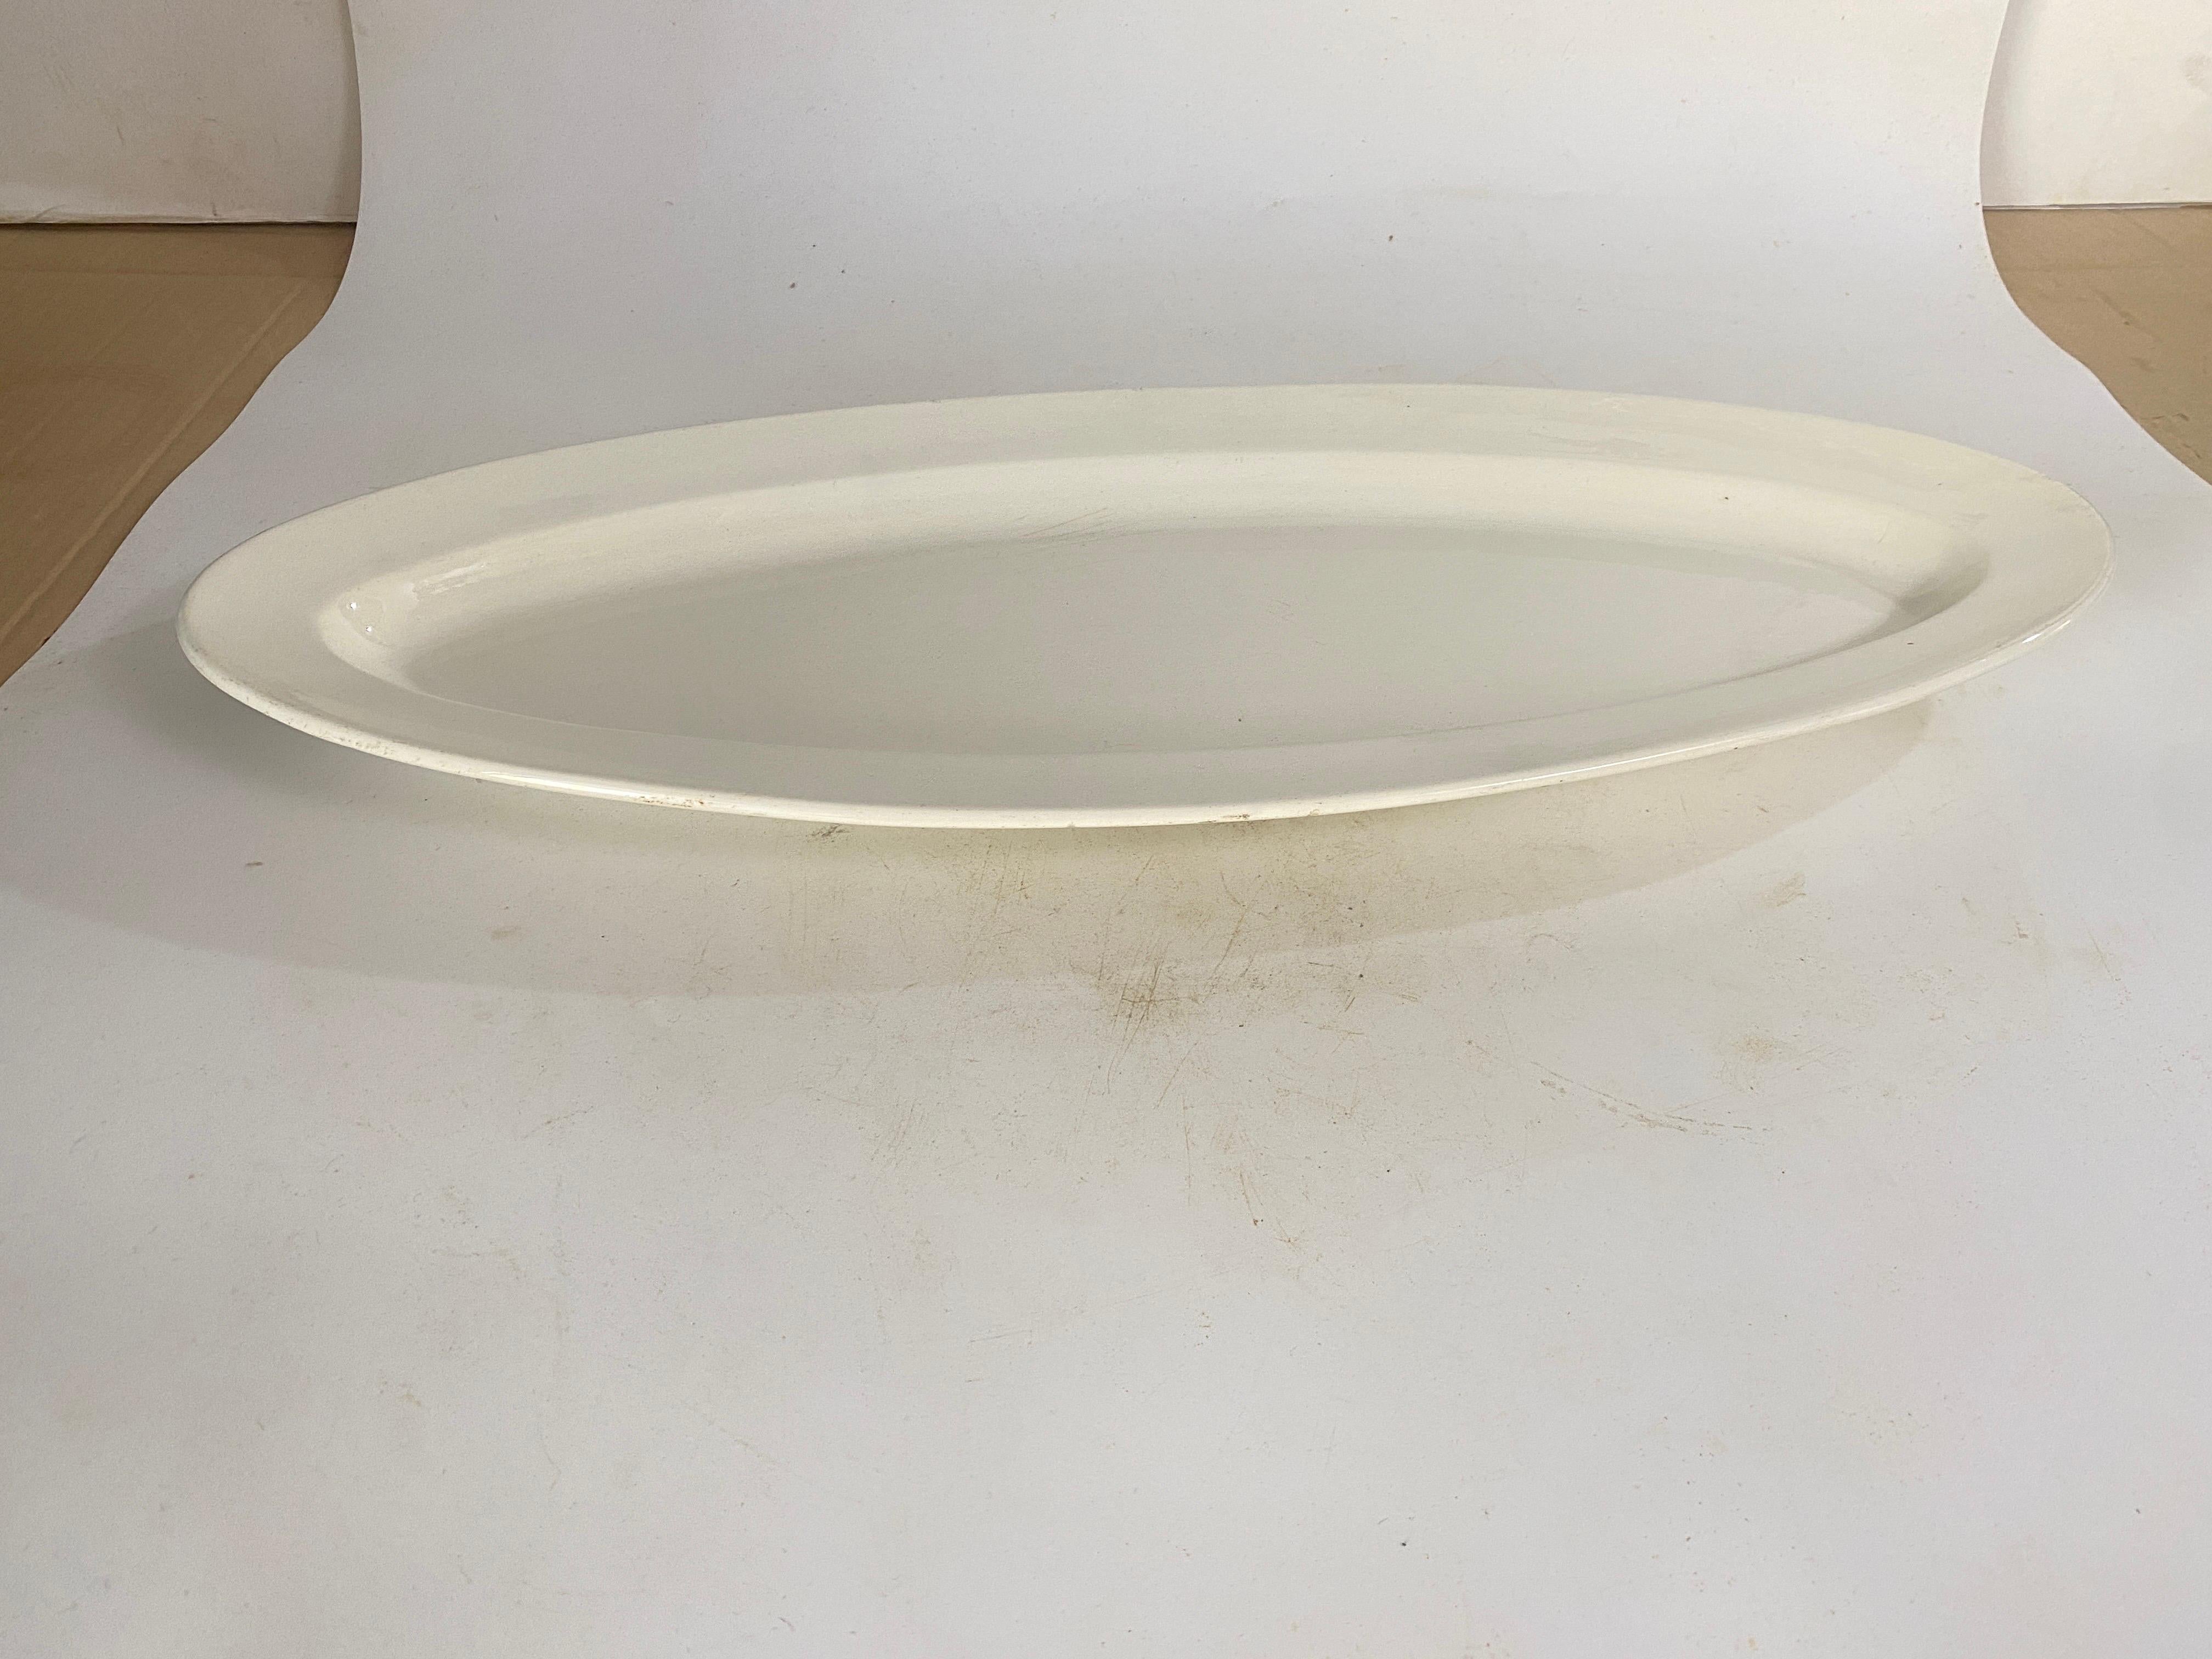  Old Dish Large from the DIGOIN-SARREGUEMINES factory, White Enameled Faience For Sale 5